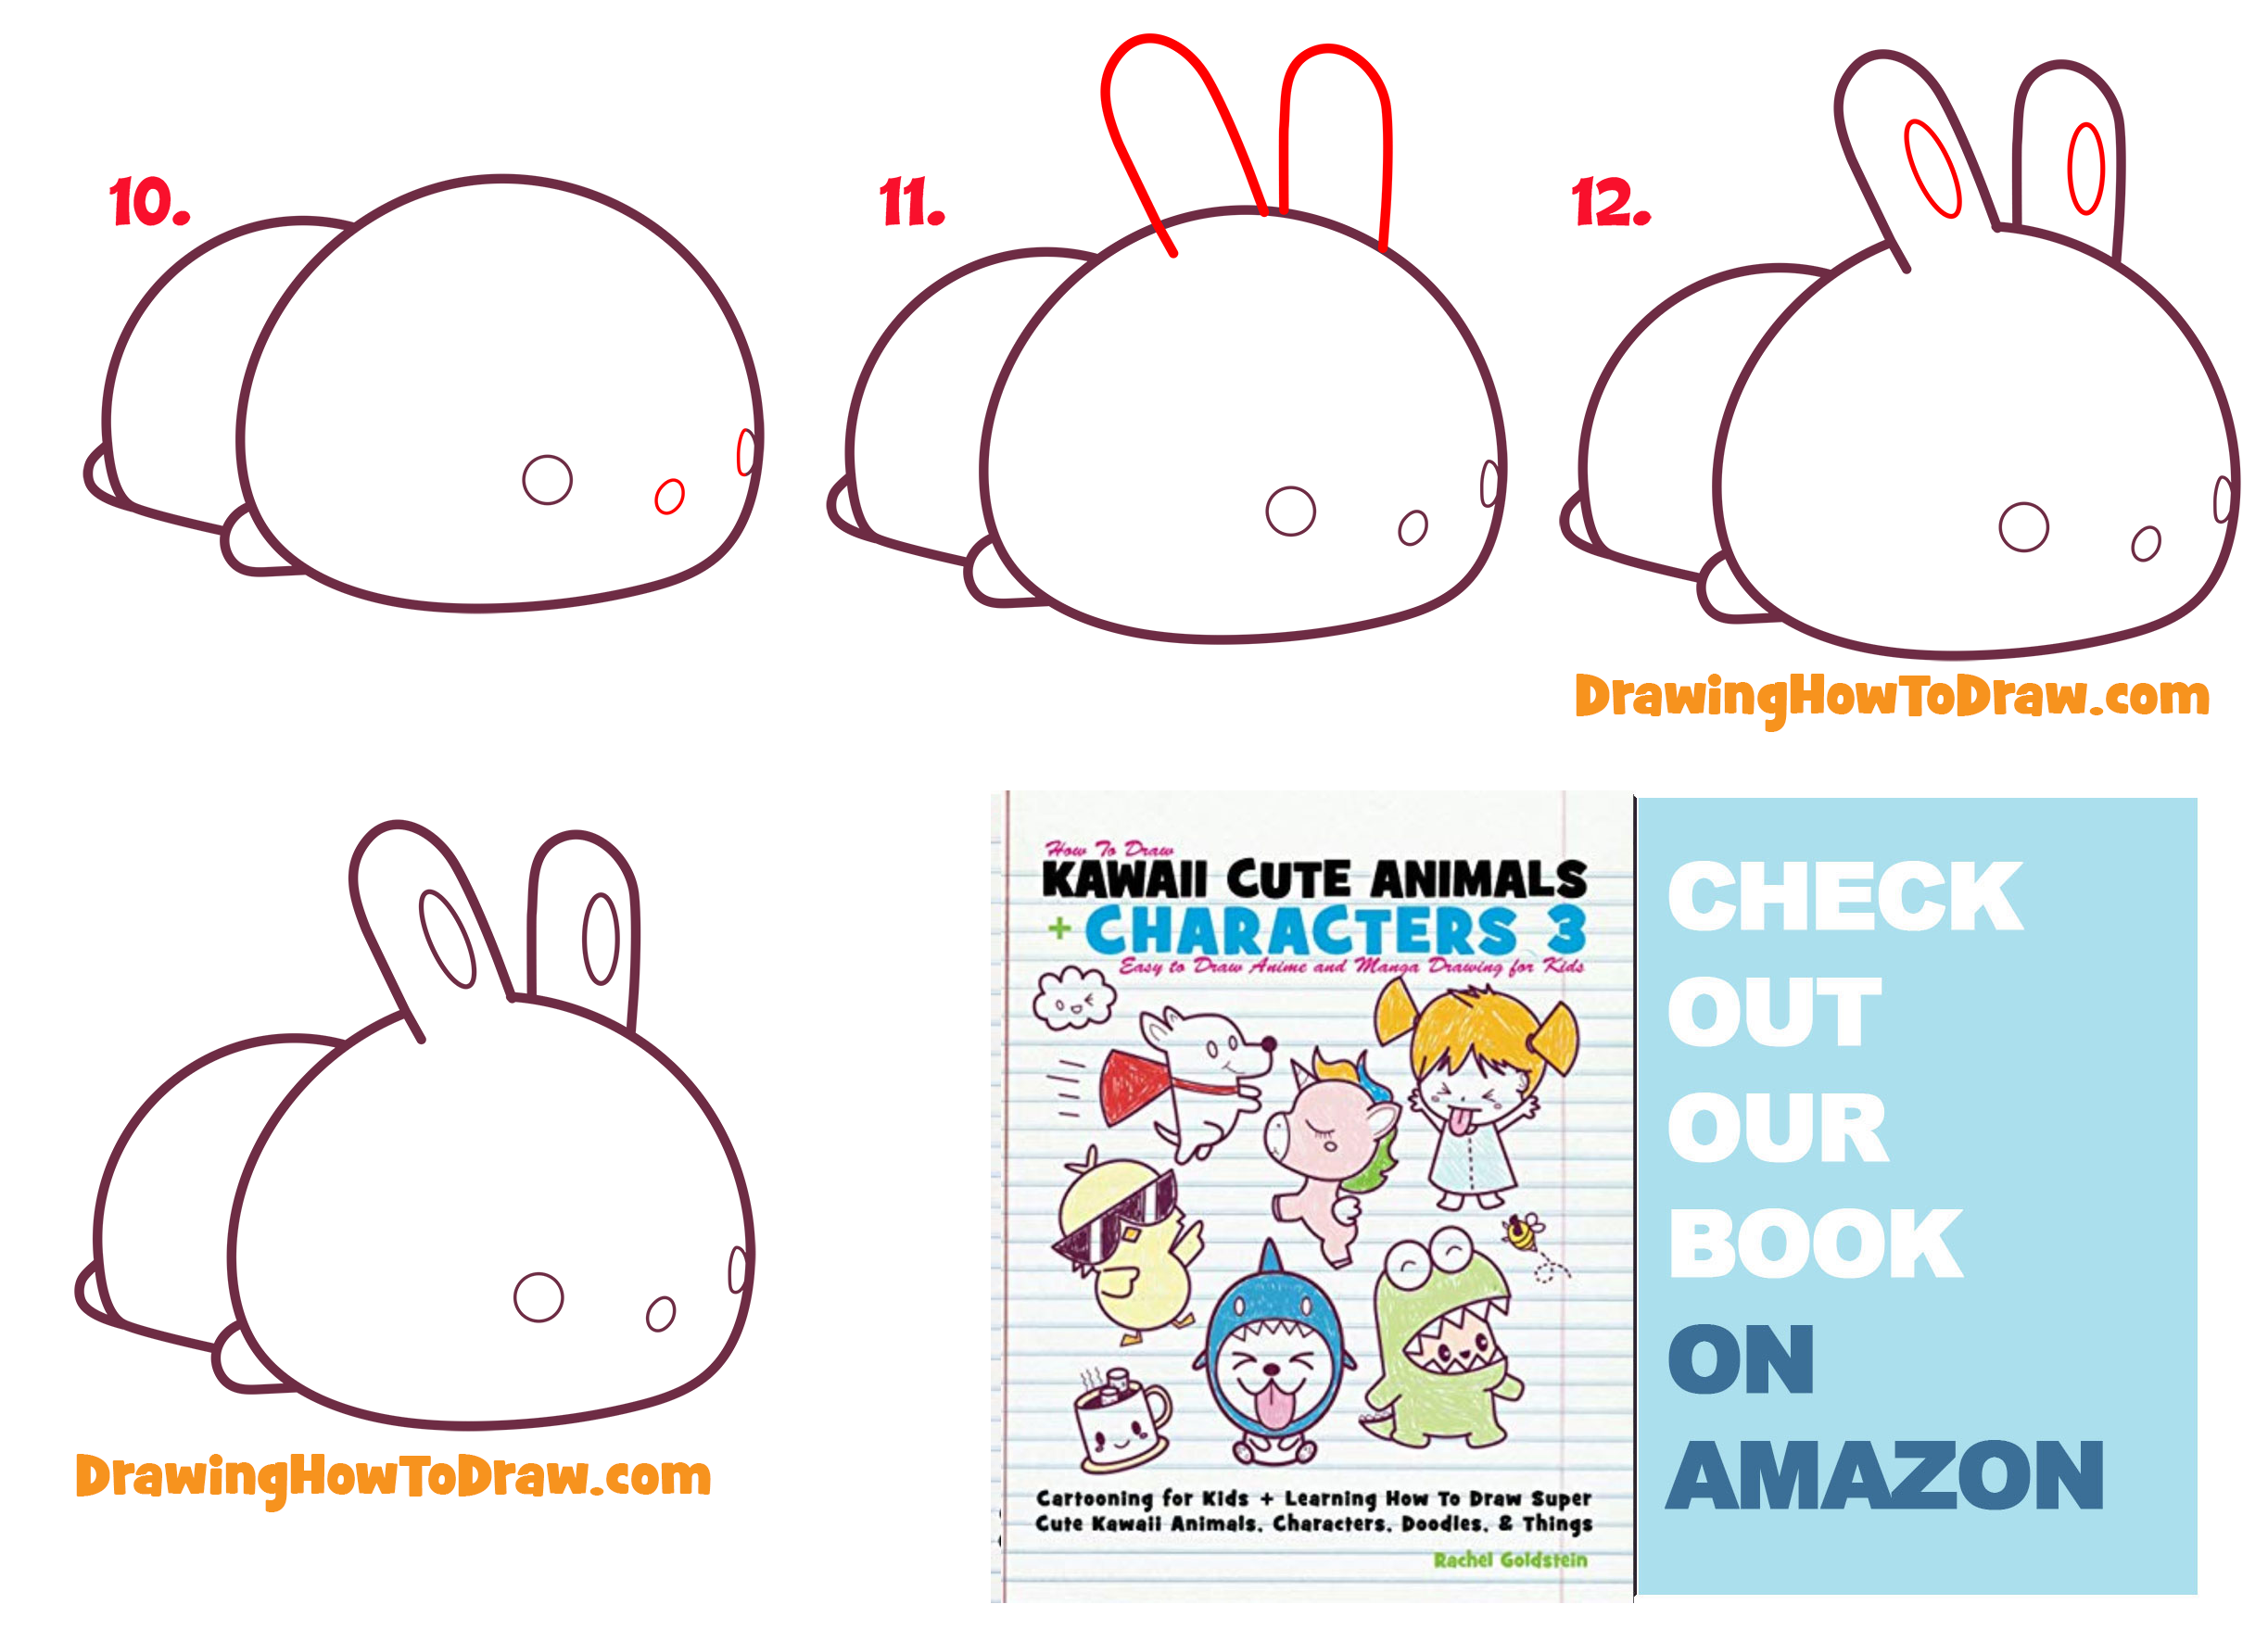 How to Draw a Cute Bunny Rabbit Laying Down (Kawaii / Chibi Style) Easy Step-by-Step Drawing Tutorial for Kids